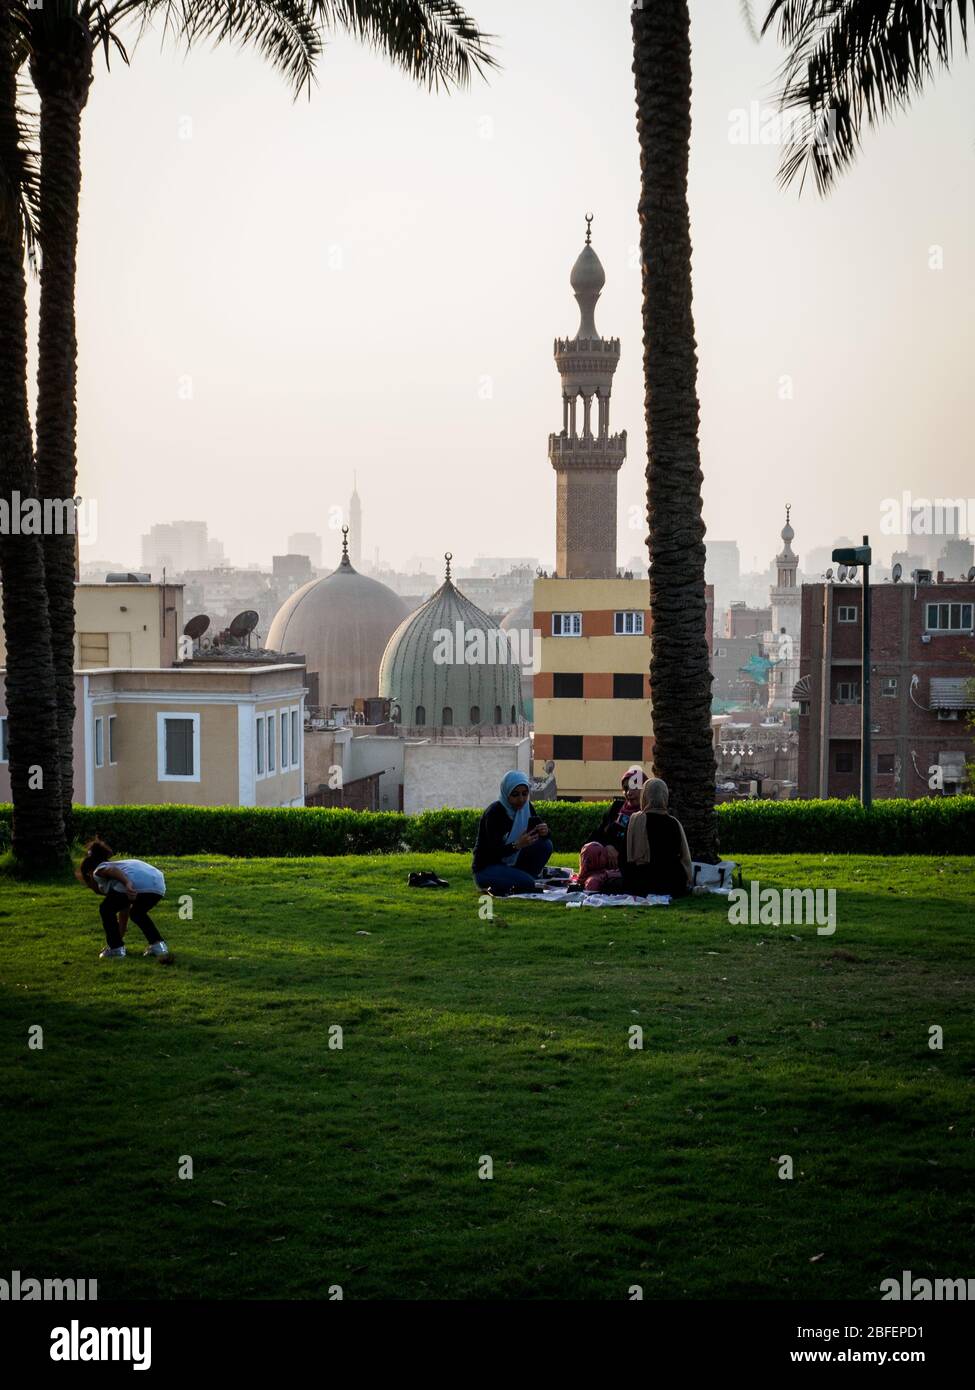 Al Azhar Park, Cairo, Egypt, October 2019, three girls sitting on the grass and a child playing with the skyline of cairo in the background Stock Photo